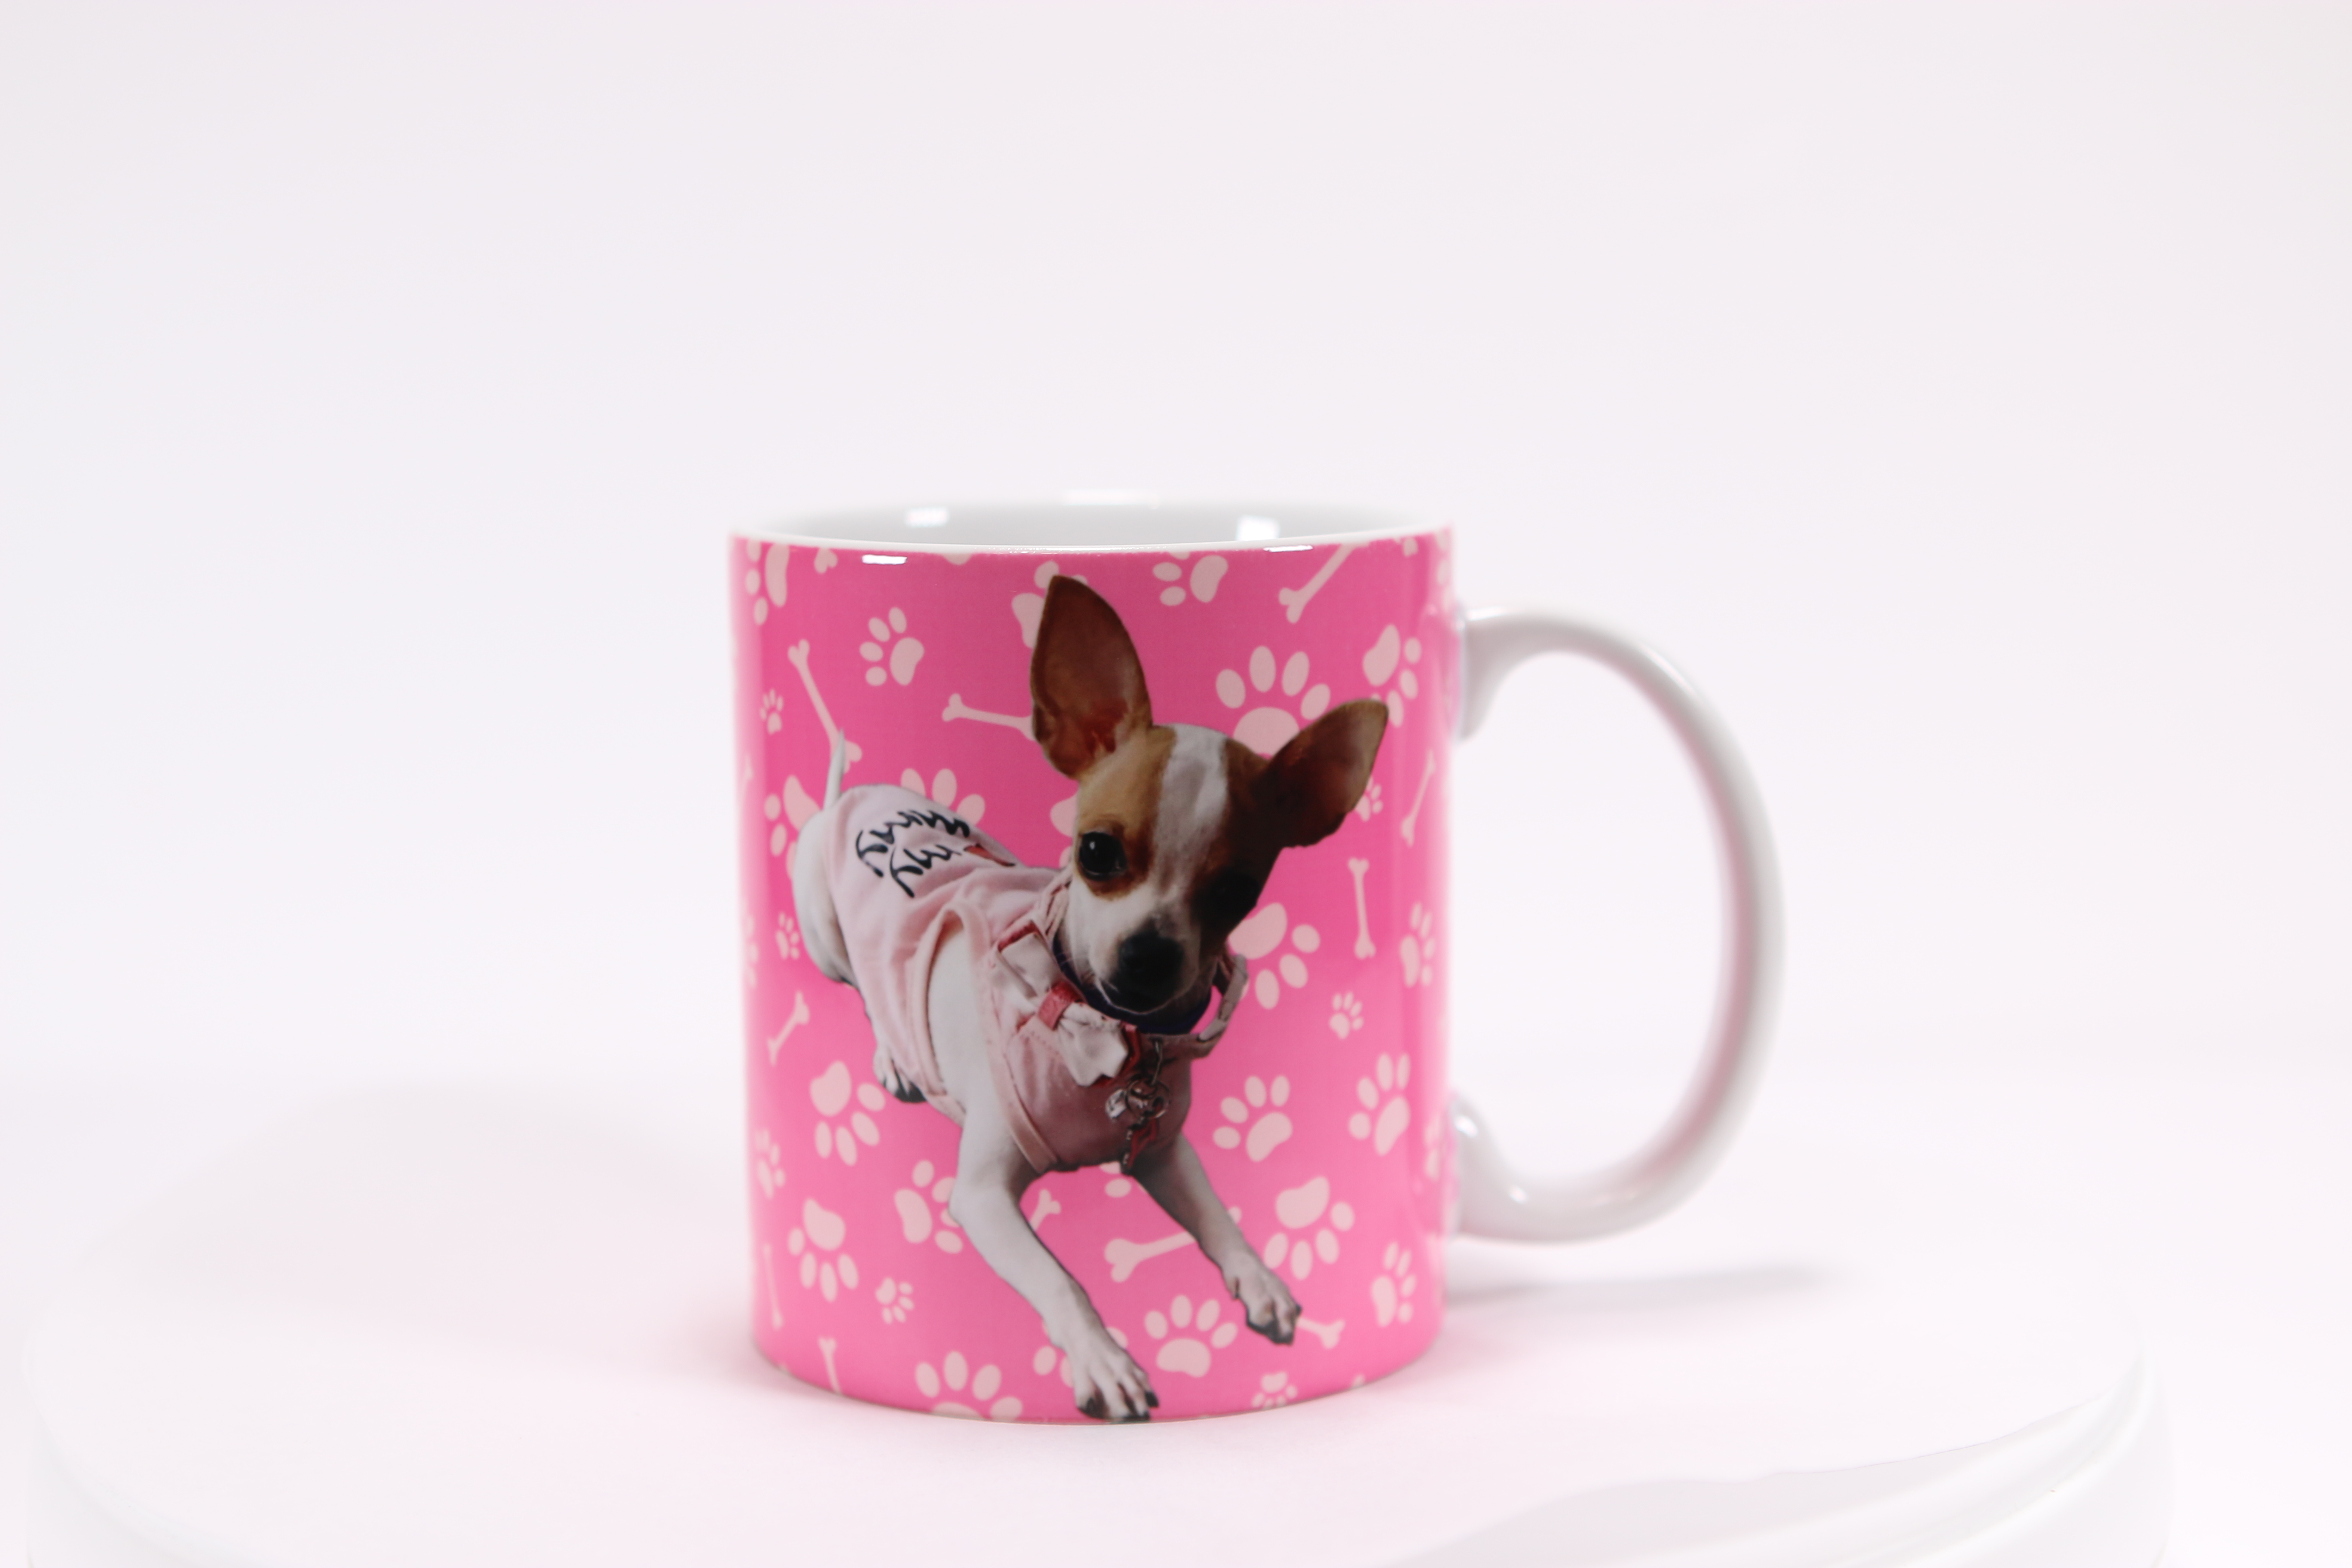 The dog owner love her dog that she wanted a mug to have her next on the office